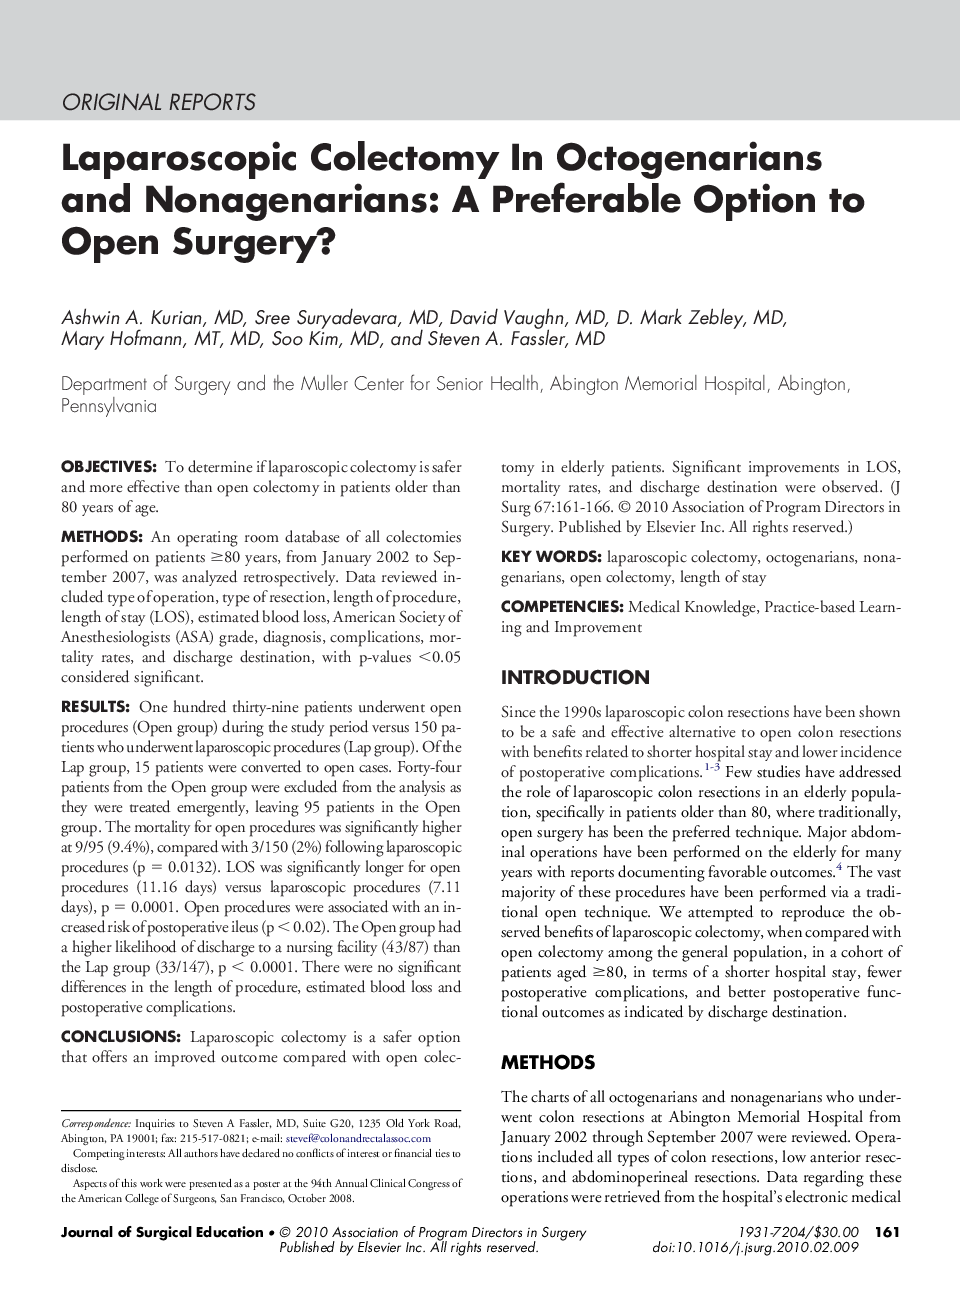 Laparoscopic Colectomy In Octogenarians and Nonagenarians: A Preferable Option to Open Surgery?